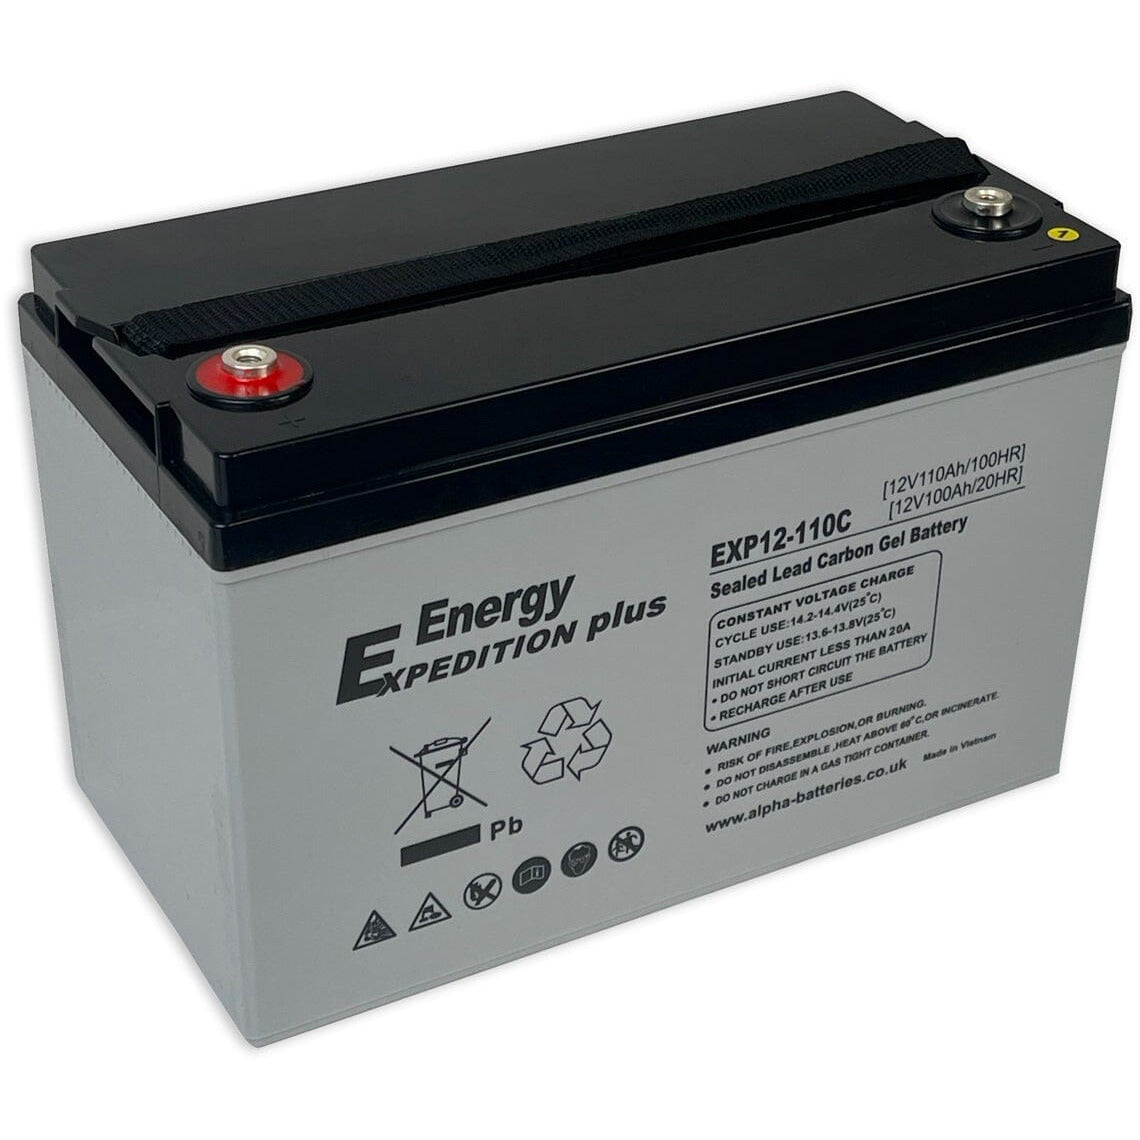 Expedition 1500 Cycle GEL Leisure Battery - Regular Off-grid Expedition Plus 